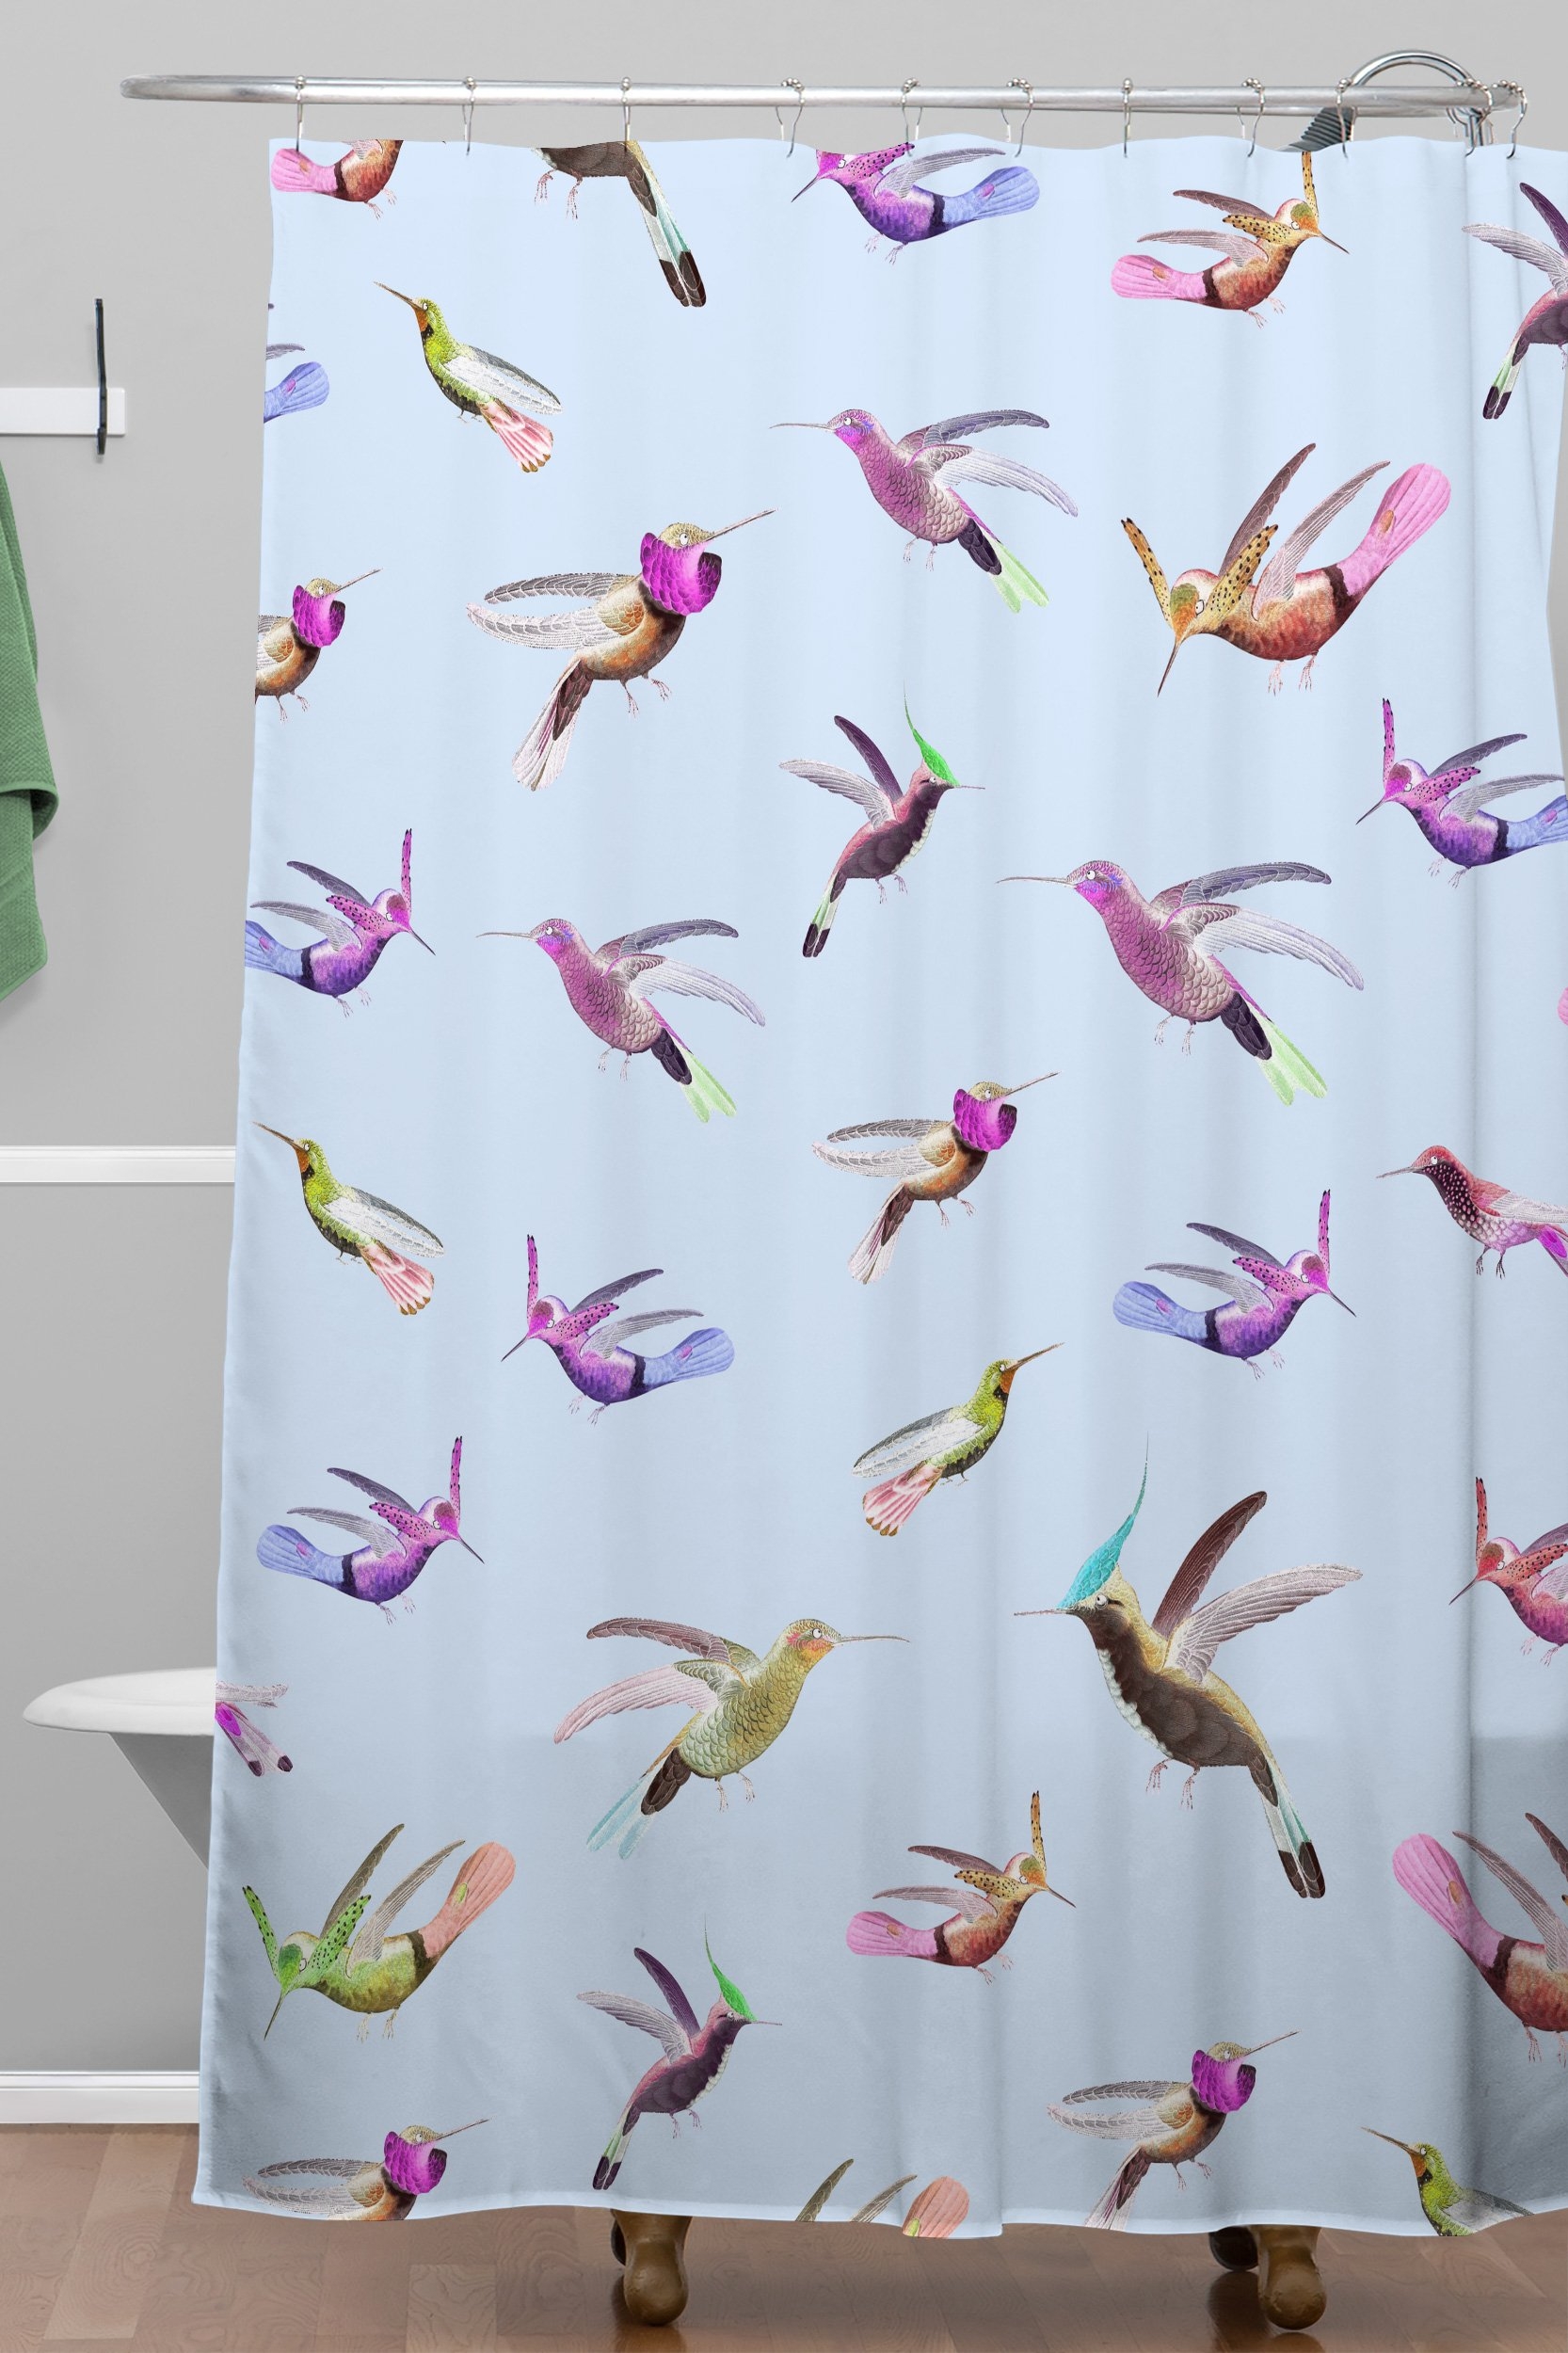 Iveta Abolina Colibri Garden Shower Curtain - Standard 71"x74" with Liner and Rings - Image 1